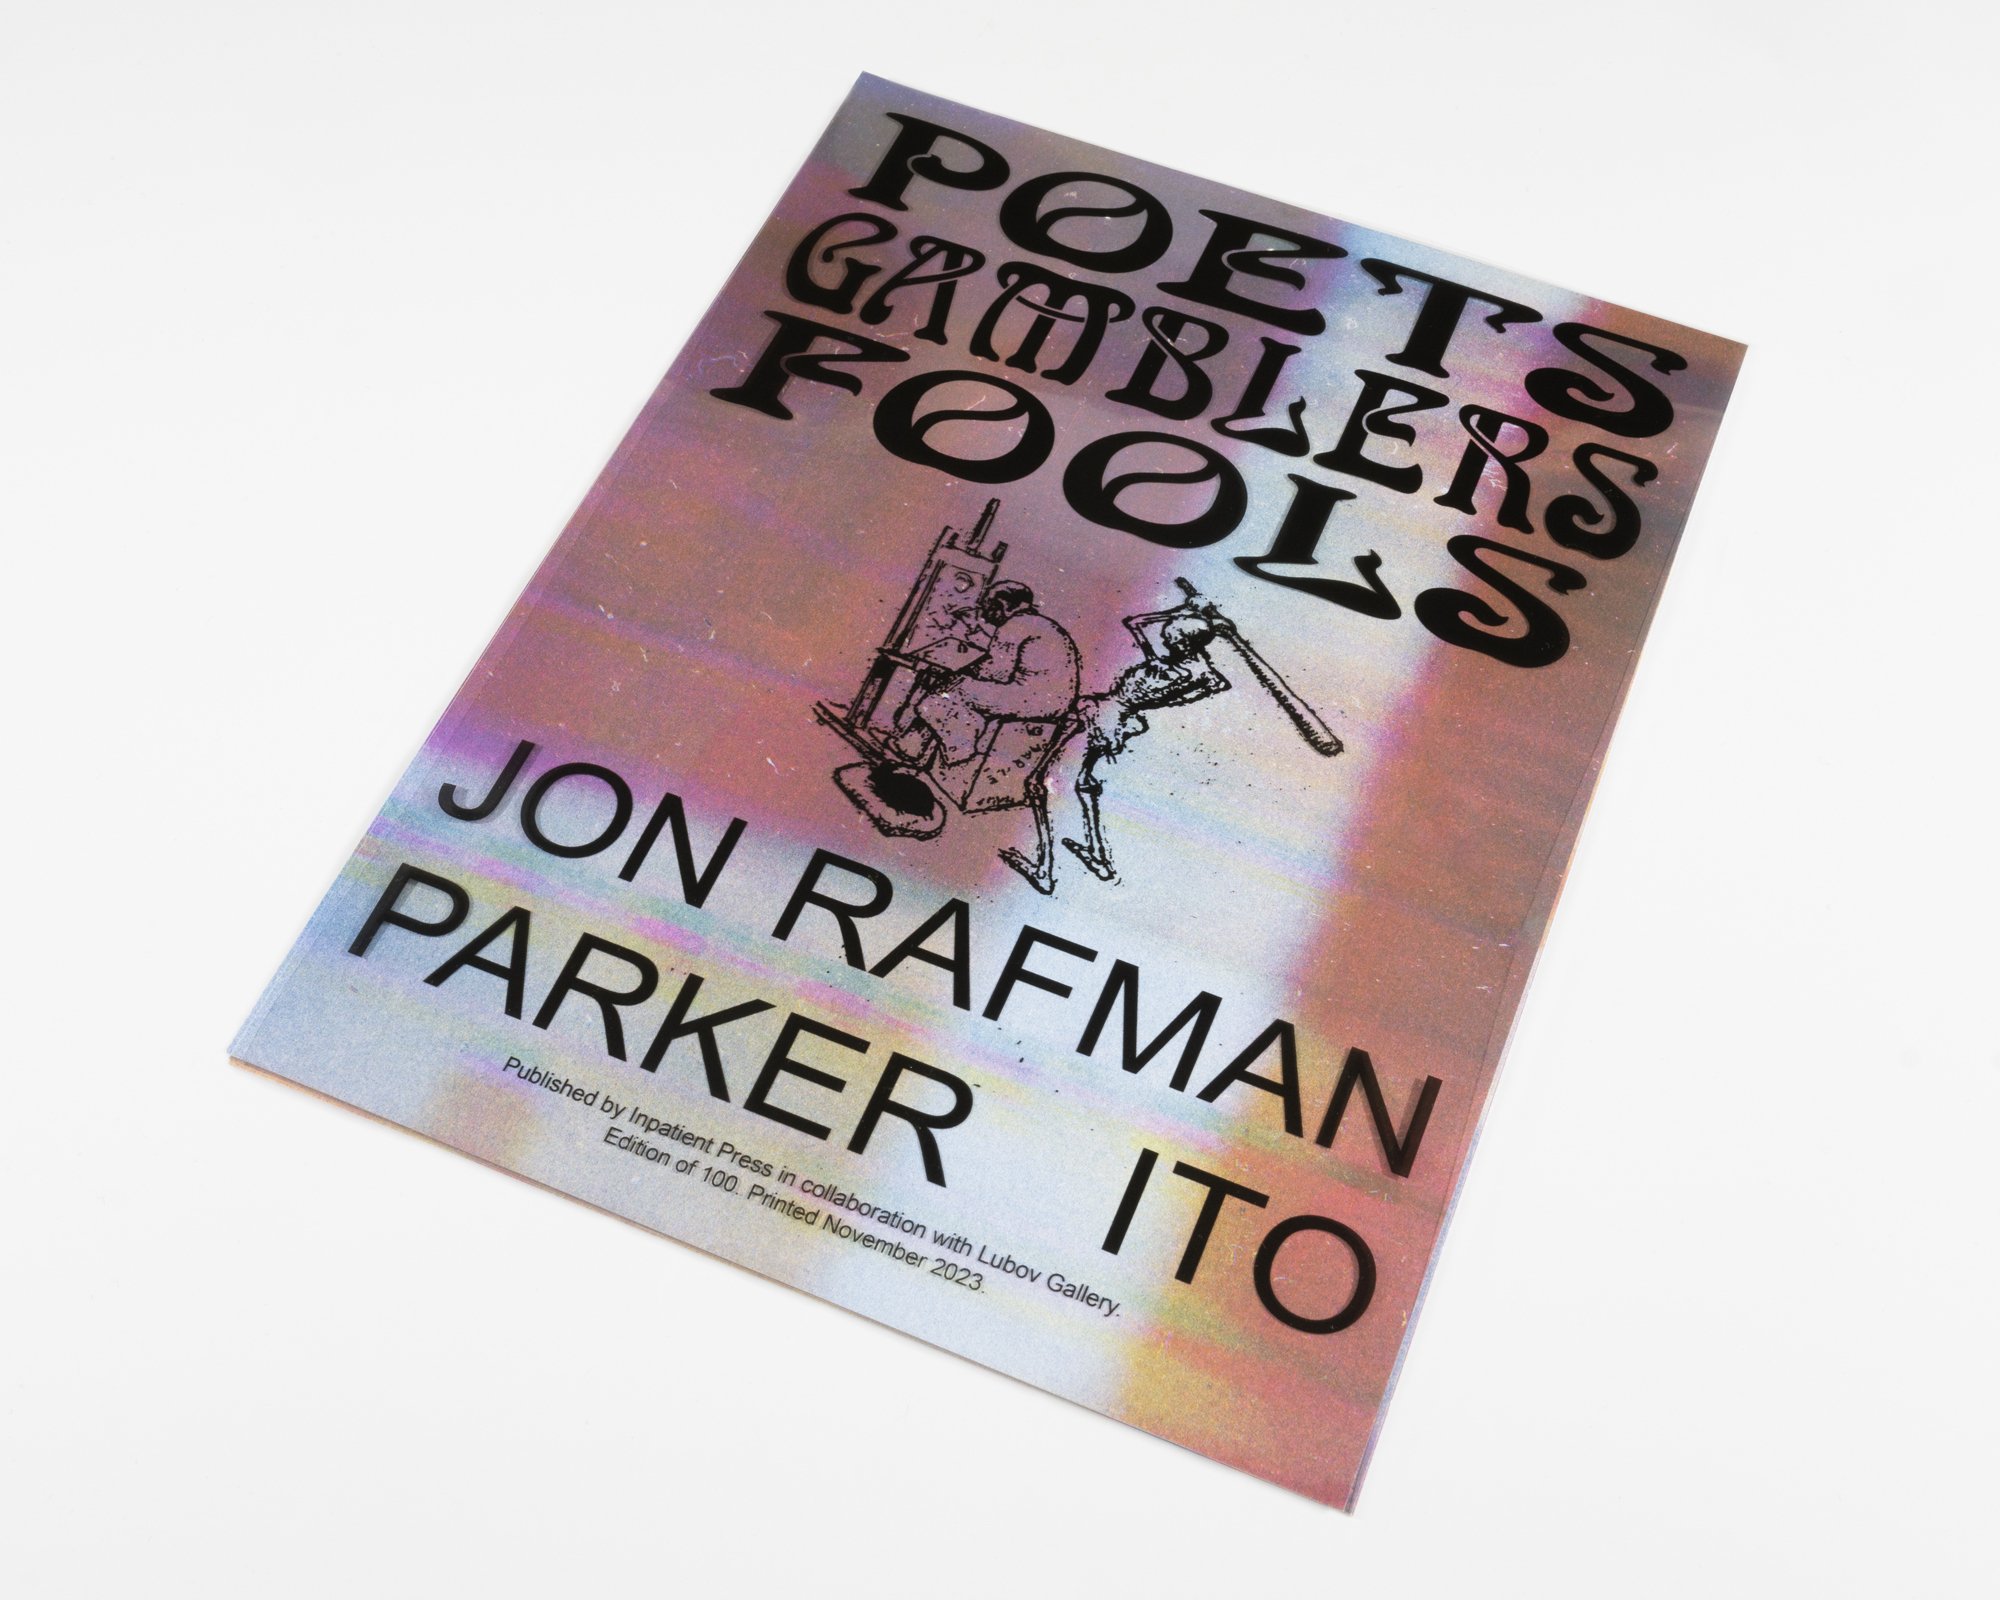  Jon Rafman &amp; Parker Ito  Poets, Gamblers, Fools  Four risograph prints (Parker Ito), one flipbook (Jon Rafman), one CD (Jon Rafman), one mylar print (Lubov &amp; Inpatient Press) Edition of 100 November 2023 Published by Inpatient Press on the o